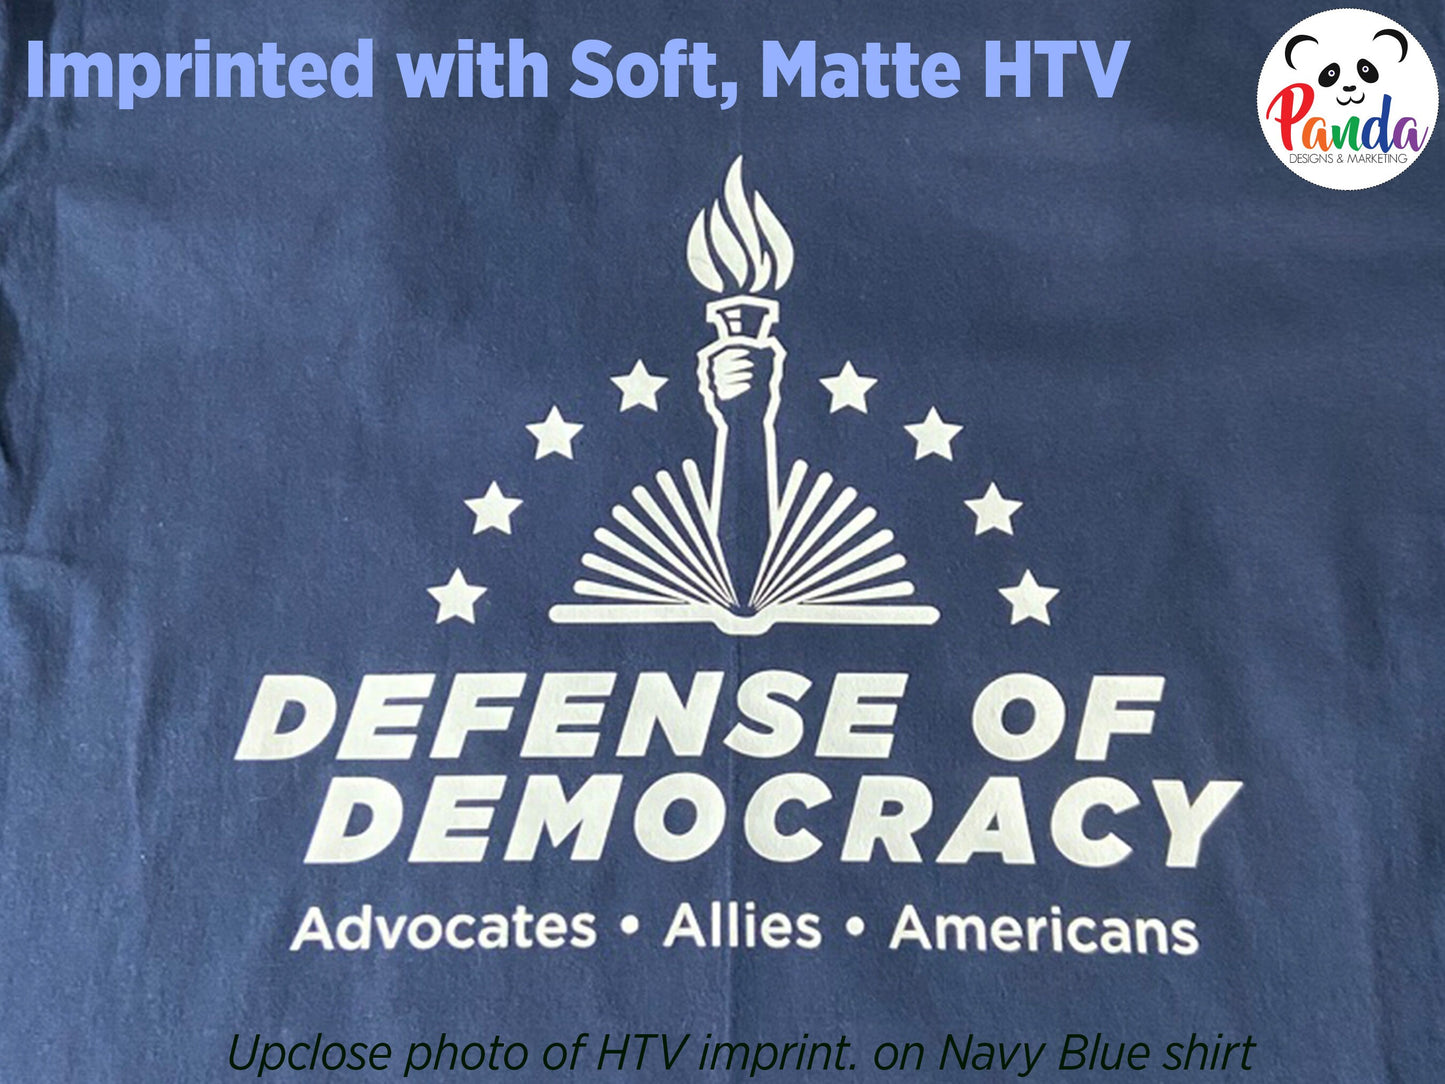 Chapter Chair T-shirt - Defense of Democracy.